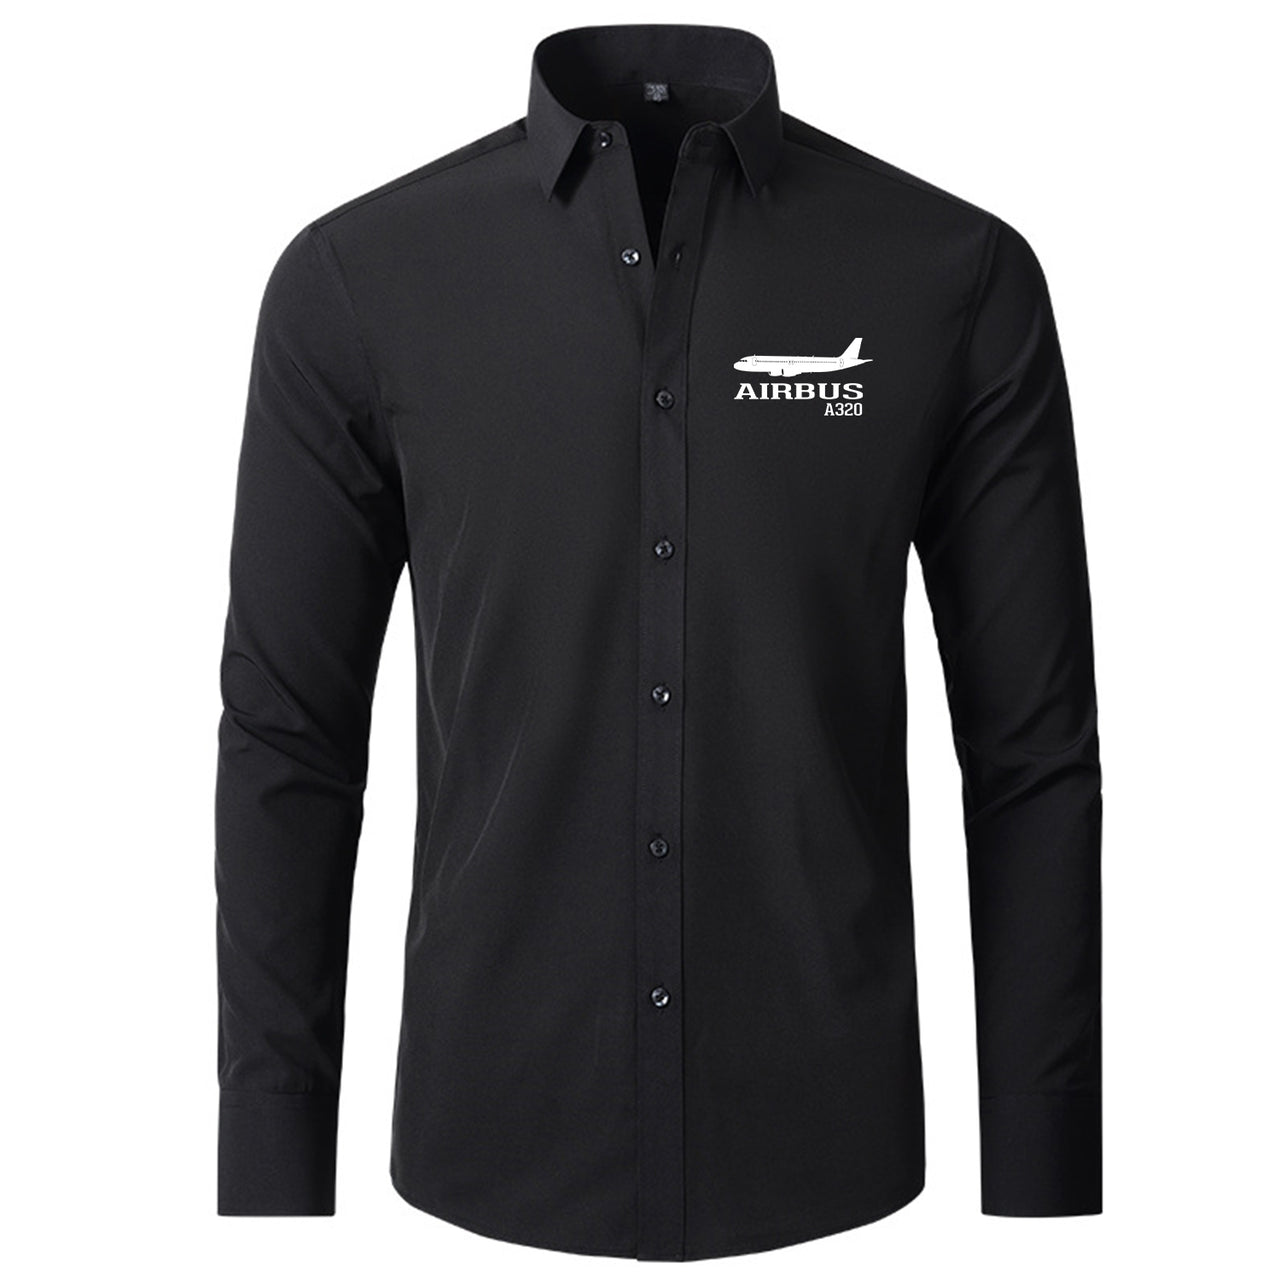 Airbus A320 Printed Designed Long Sleeve Shirts